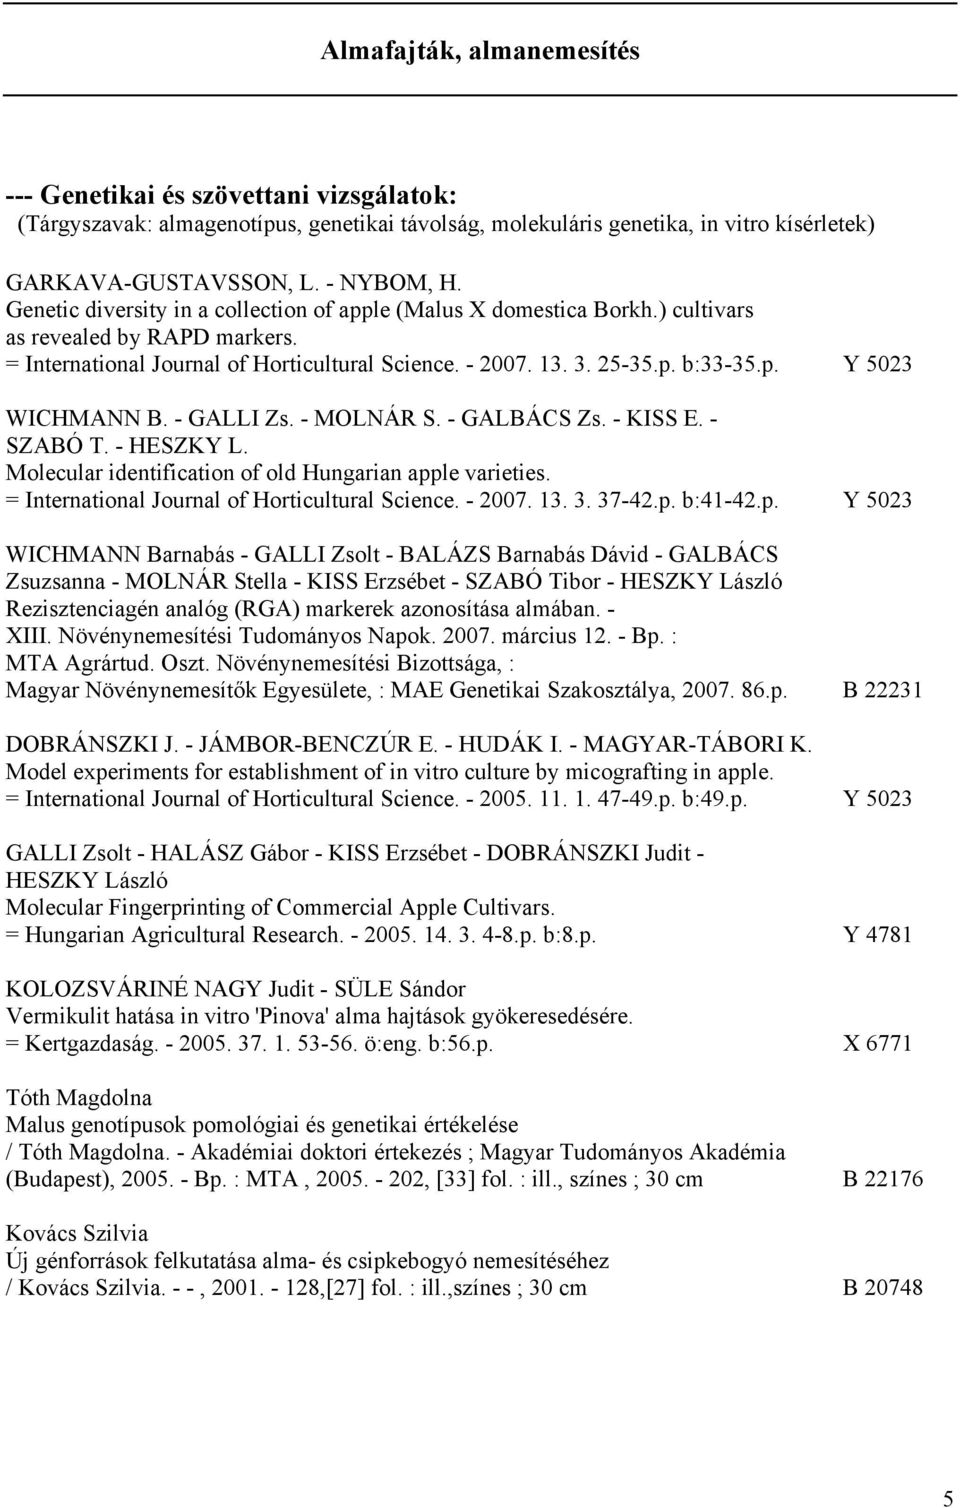 - GALLI Zs. - MOLNÁR S. - GALBÁCS Zs. - KISS E. - SZABÓ T. - HESZKY L. Molecular identification of old Hungarian apple varieties. = International Journal of Horticultural Science. - 2007. 13. 3.